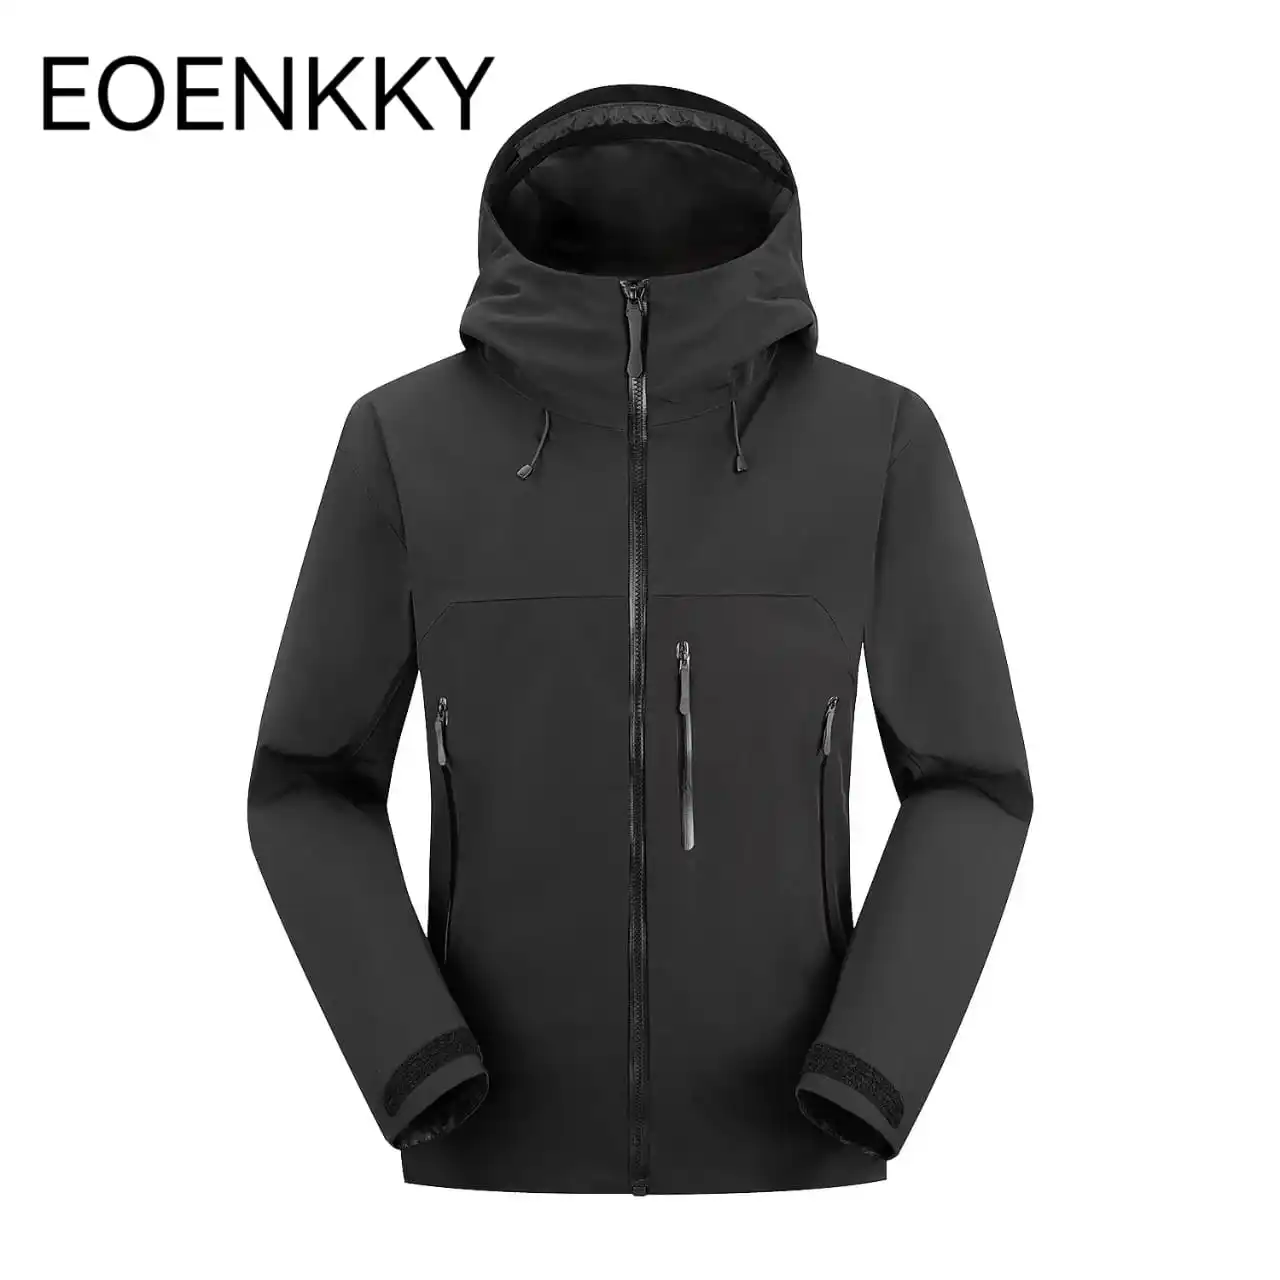 

New EOONKKY high quality Beta SV thickened version three-layer outdoor waterproof men's casual lightweight mountaineering jacket